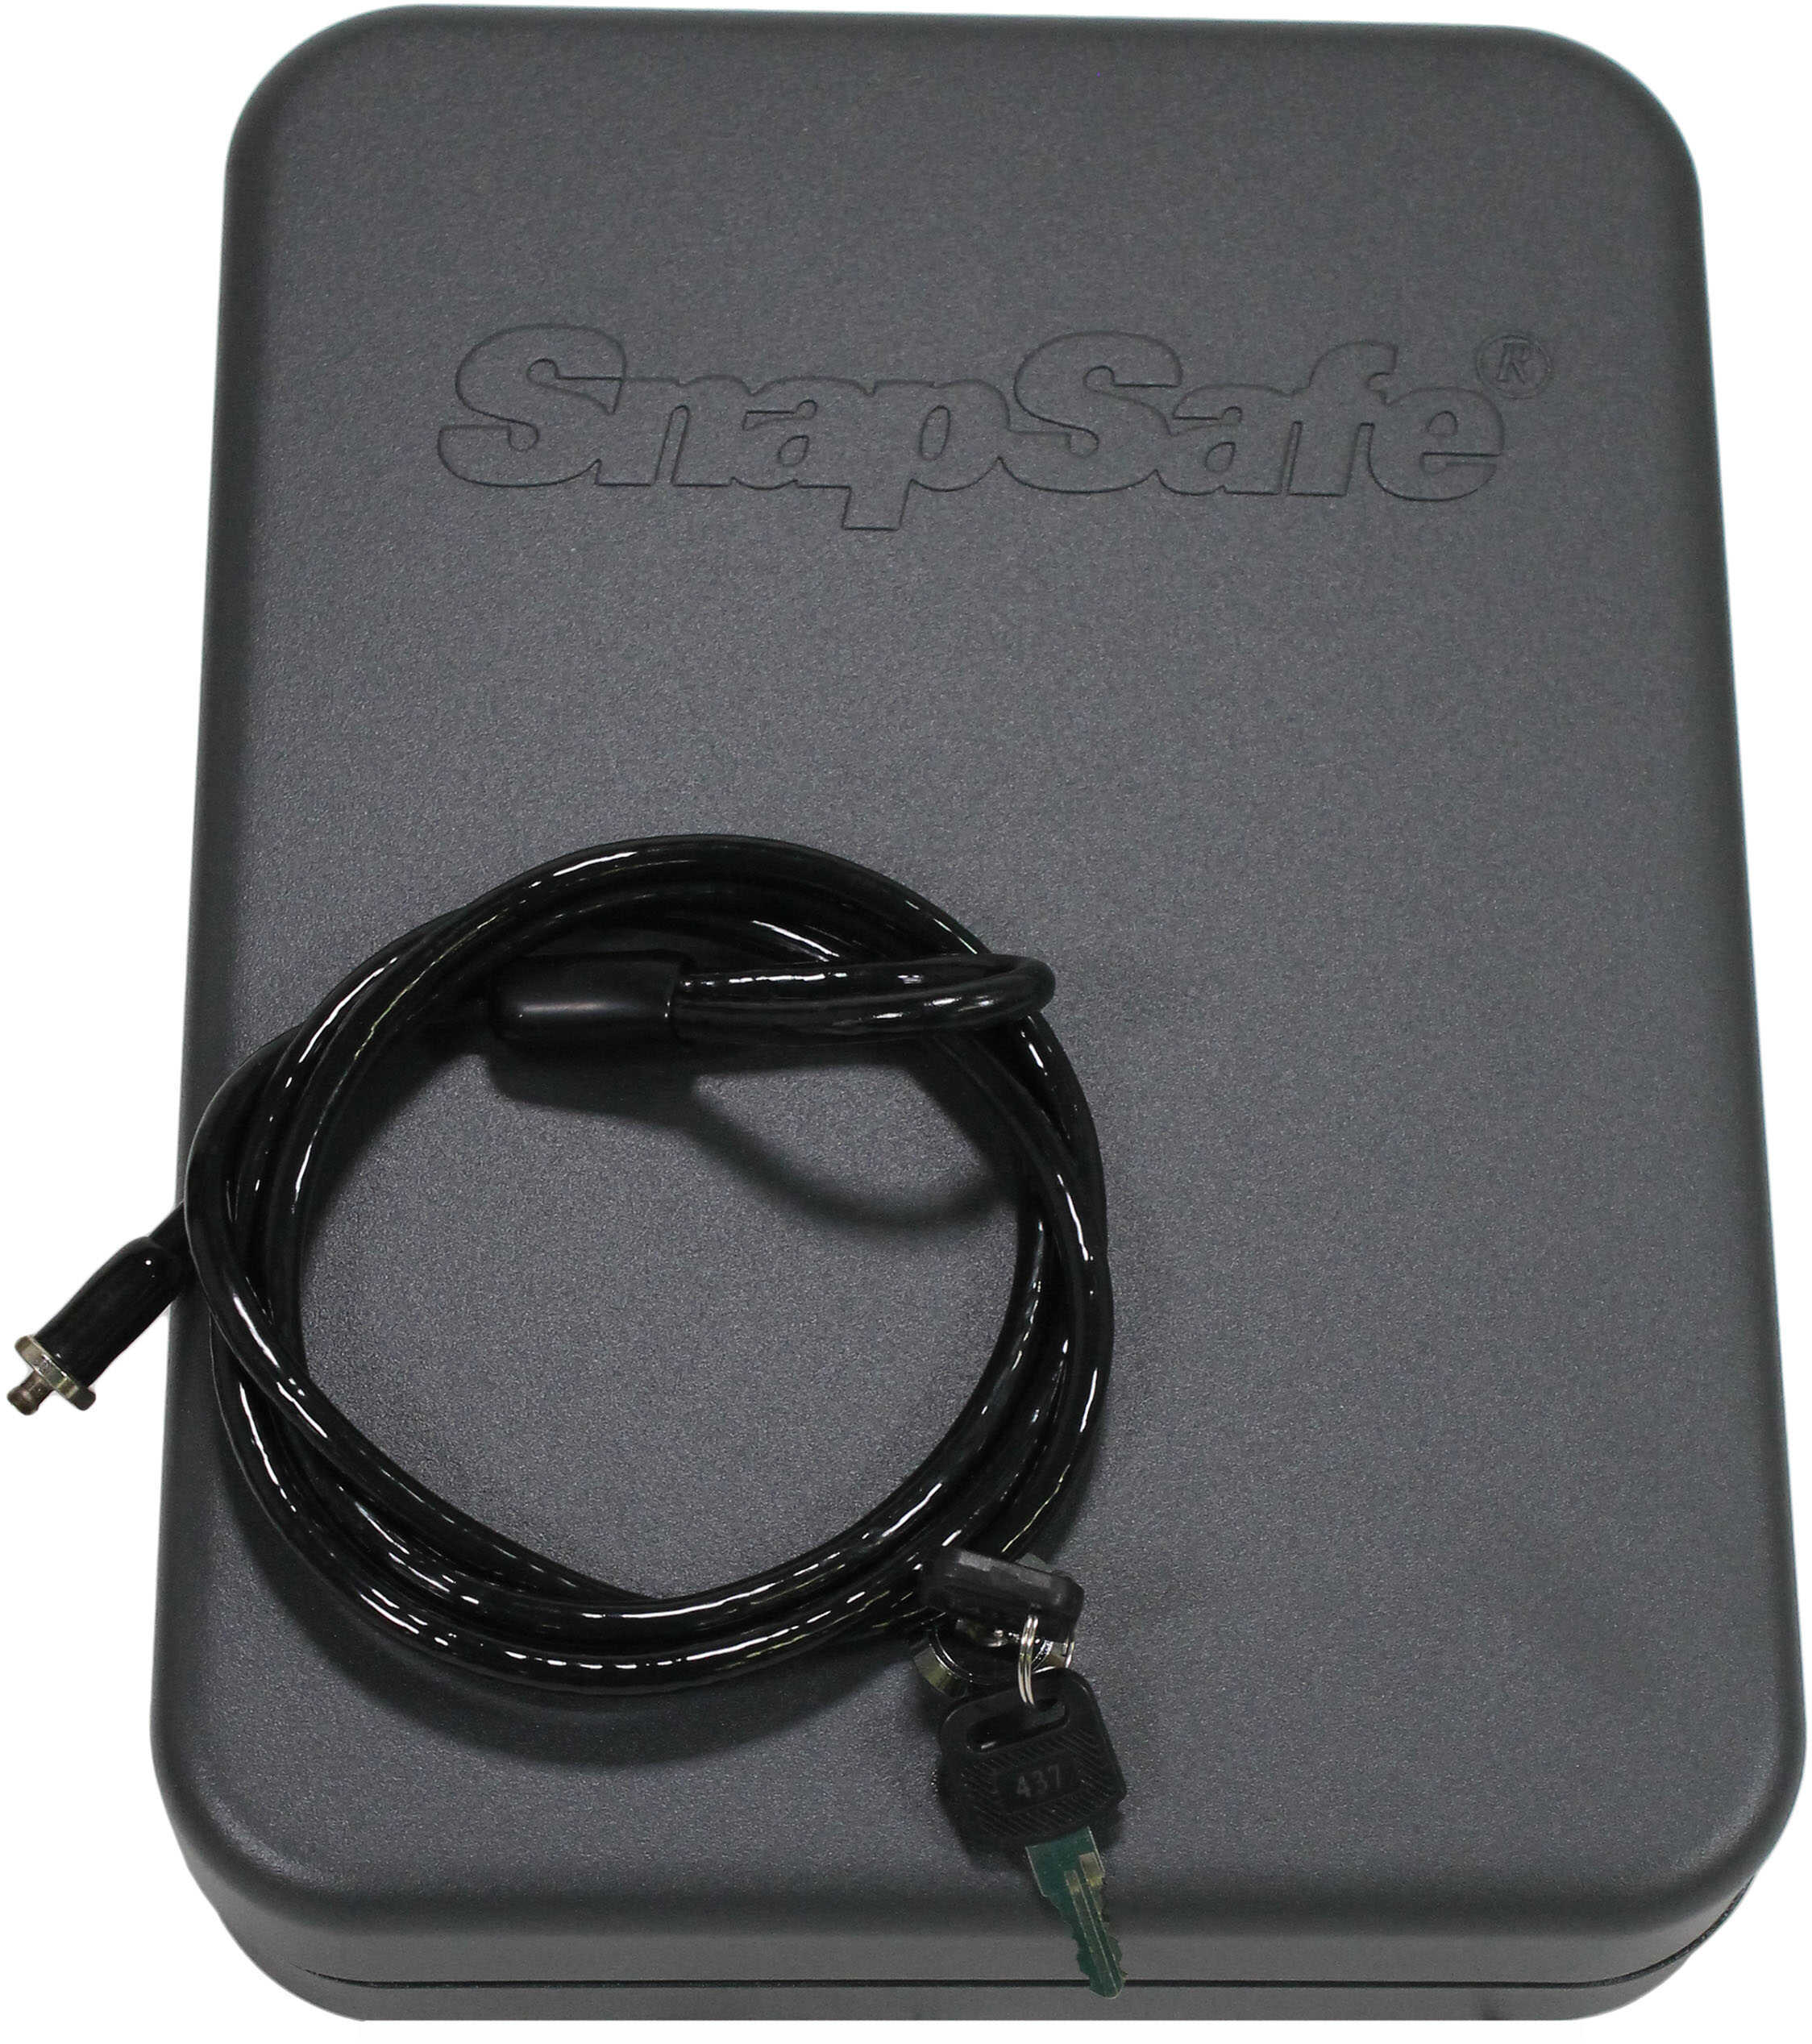 SnapSafe Lock Box XX-Large 11.5" 8.5" 2.5" Key 16 Gauge Steel Cable Included Black Finish 75220